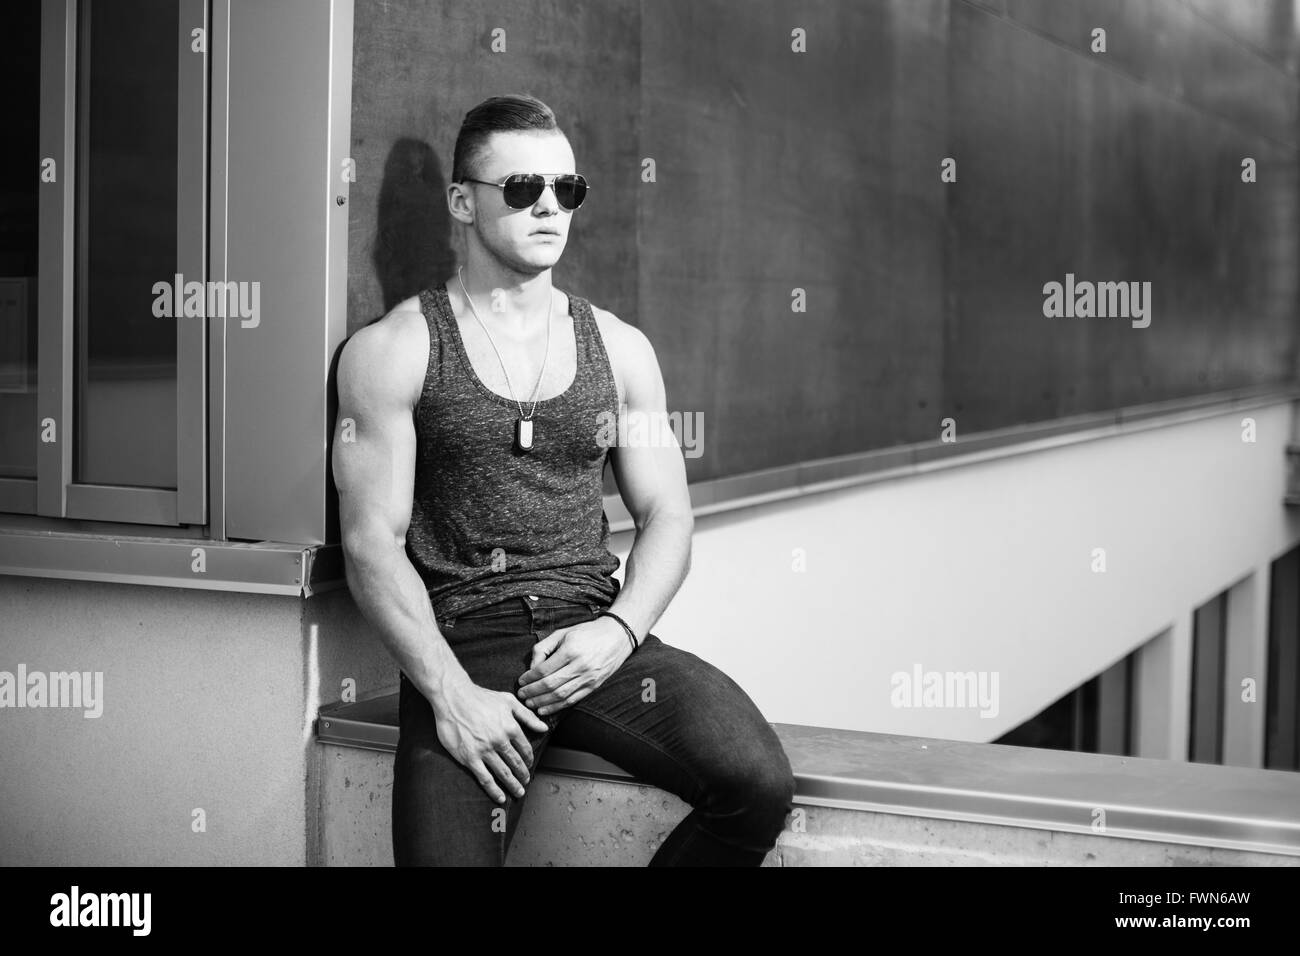 Muscular man posing near building. Black and white. Stock Photo